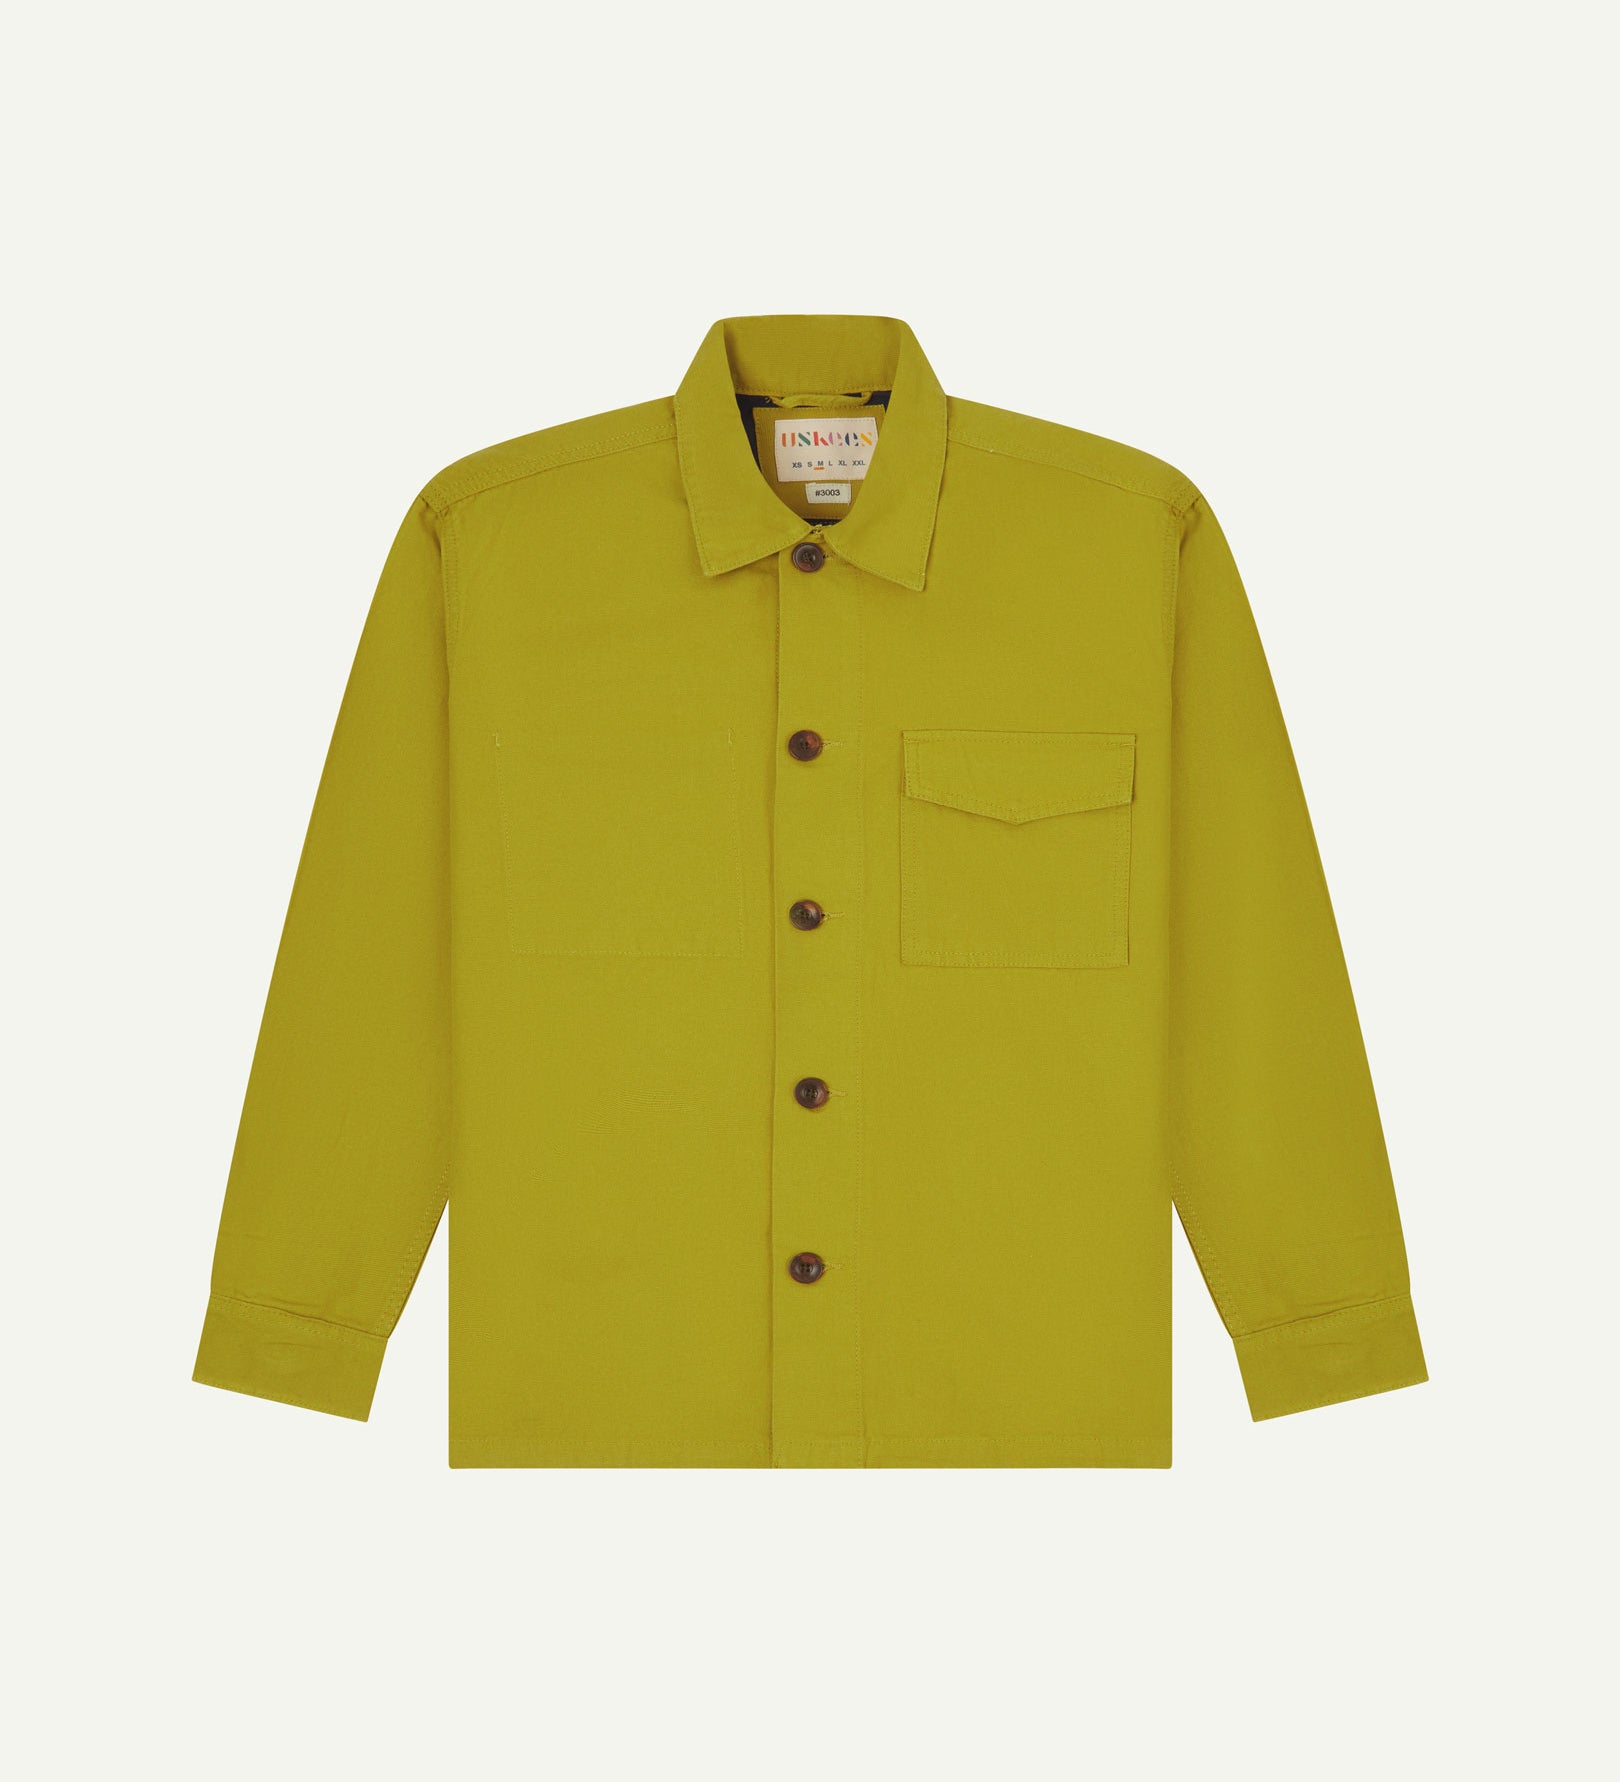 Yellow-green (pear) buttoned organic cotton workshirt from Uskees with clear view of chest pocket and Uskees branding label.